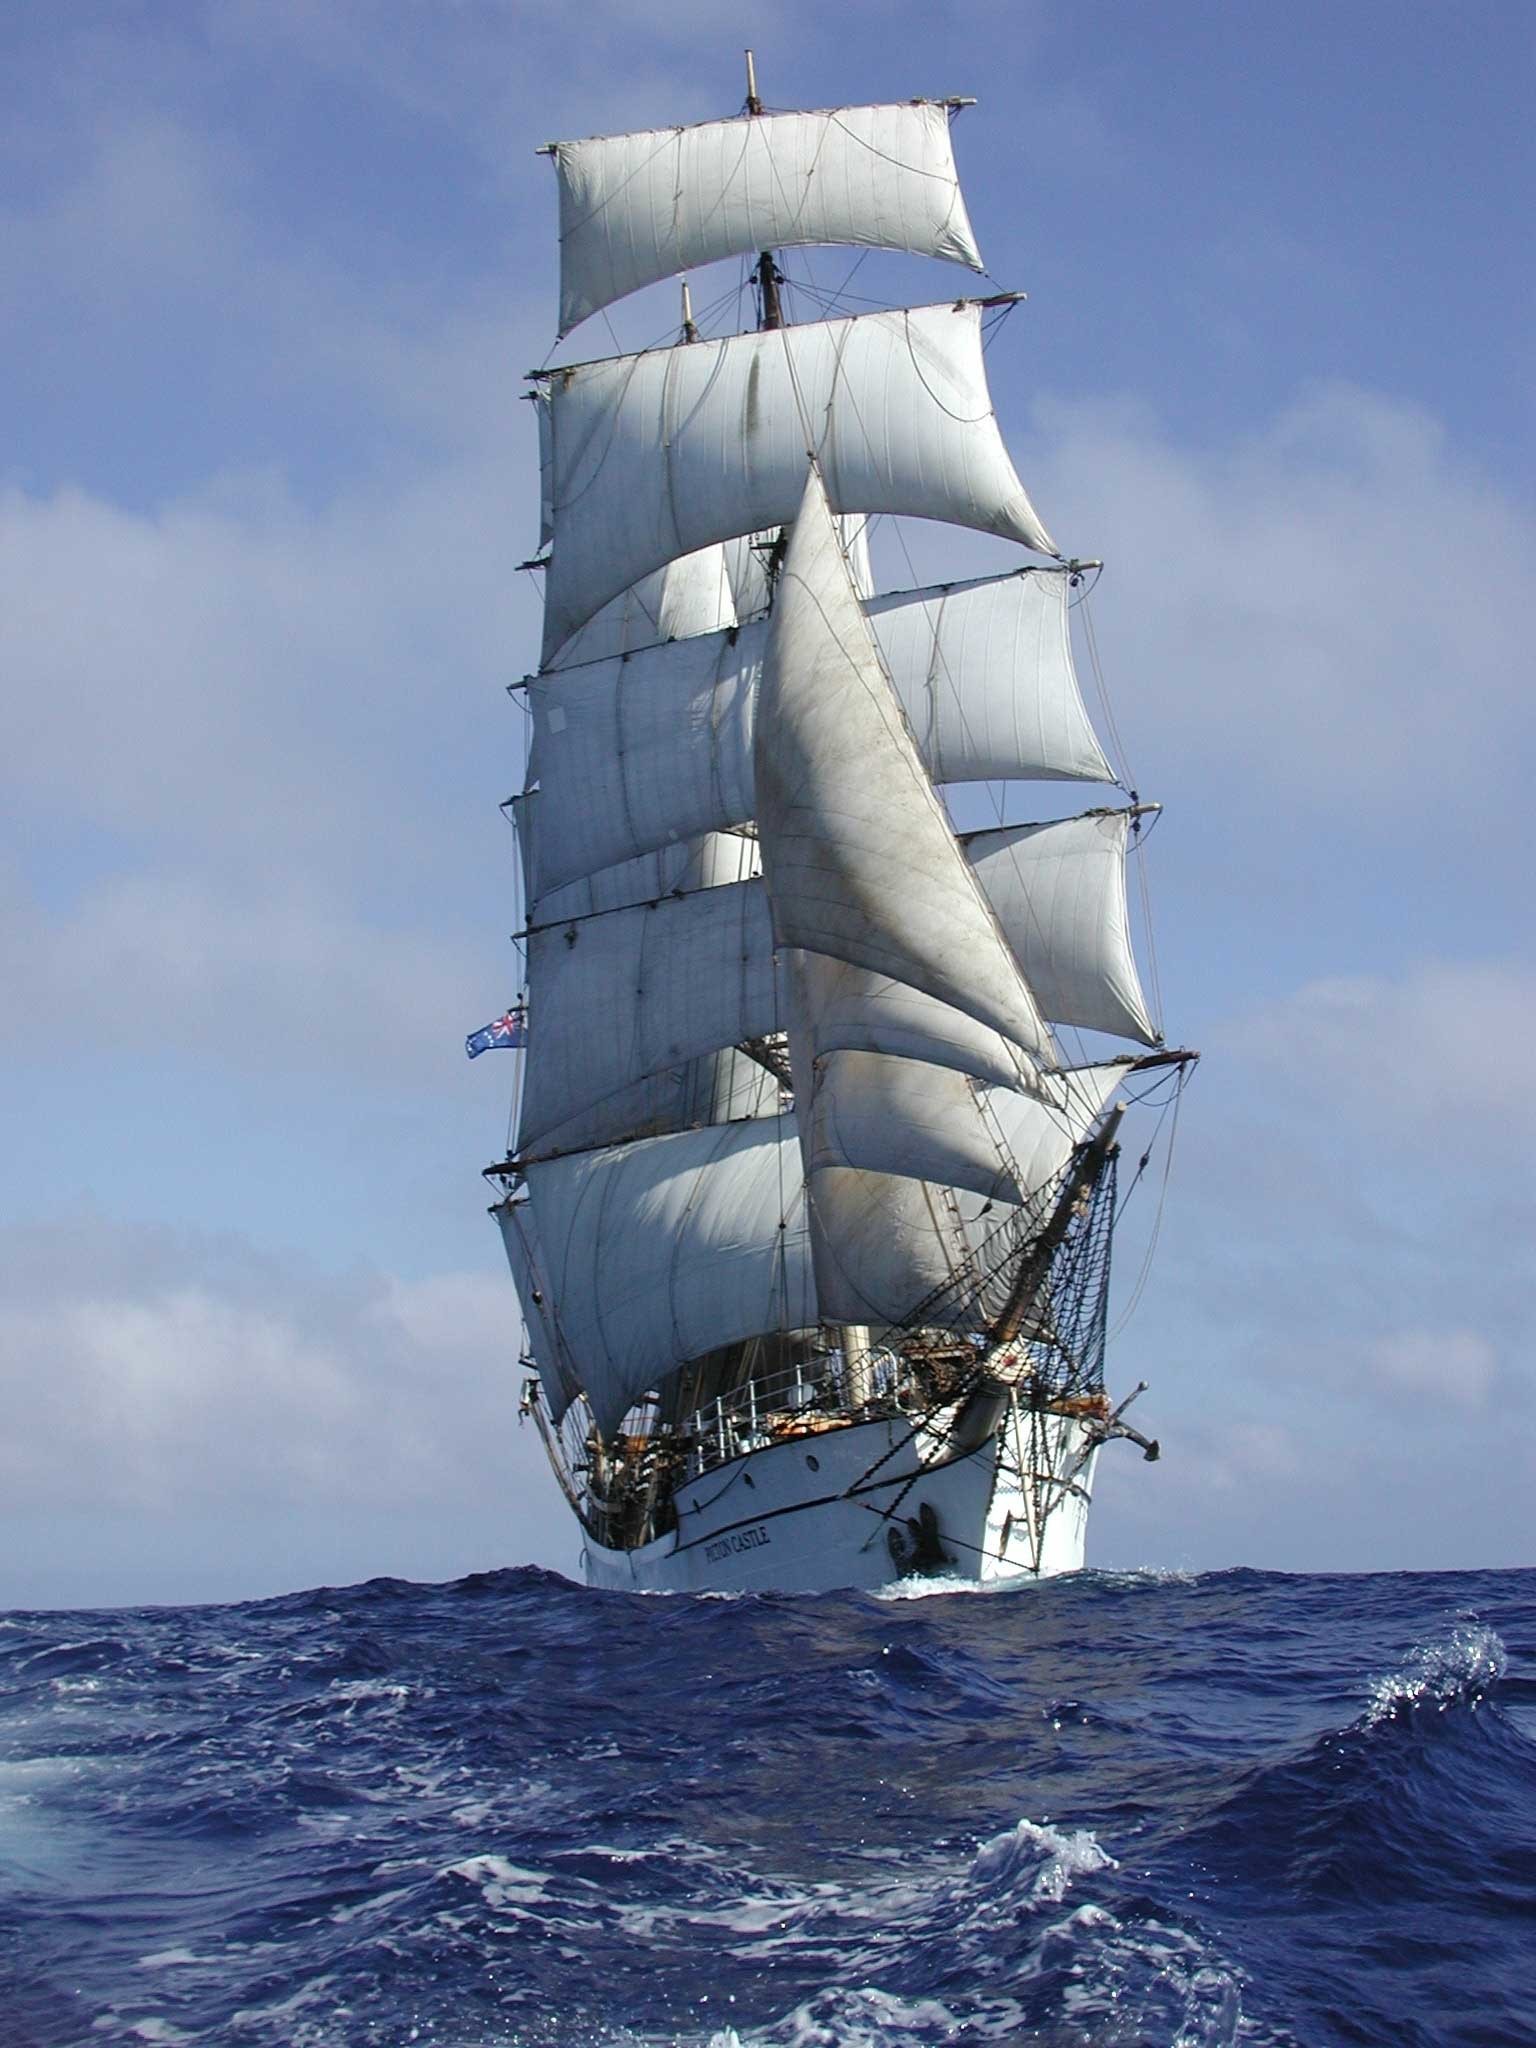 Best tall ships images on pinterest tall ships sailing ships and boats